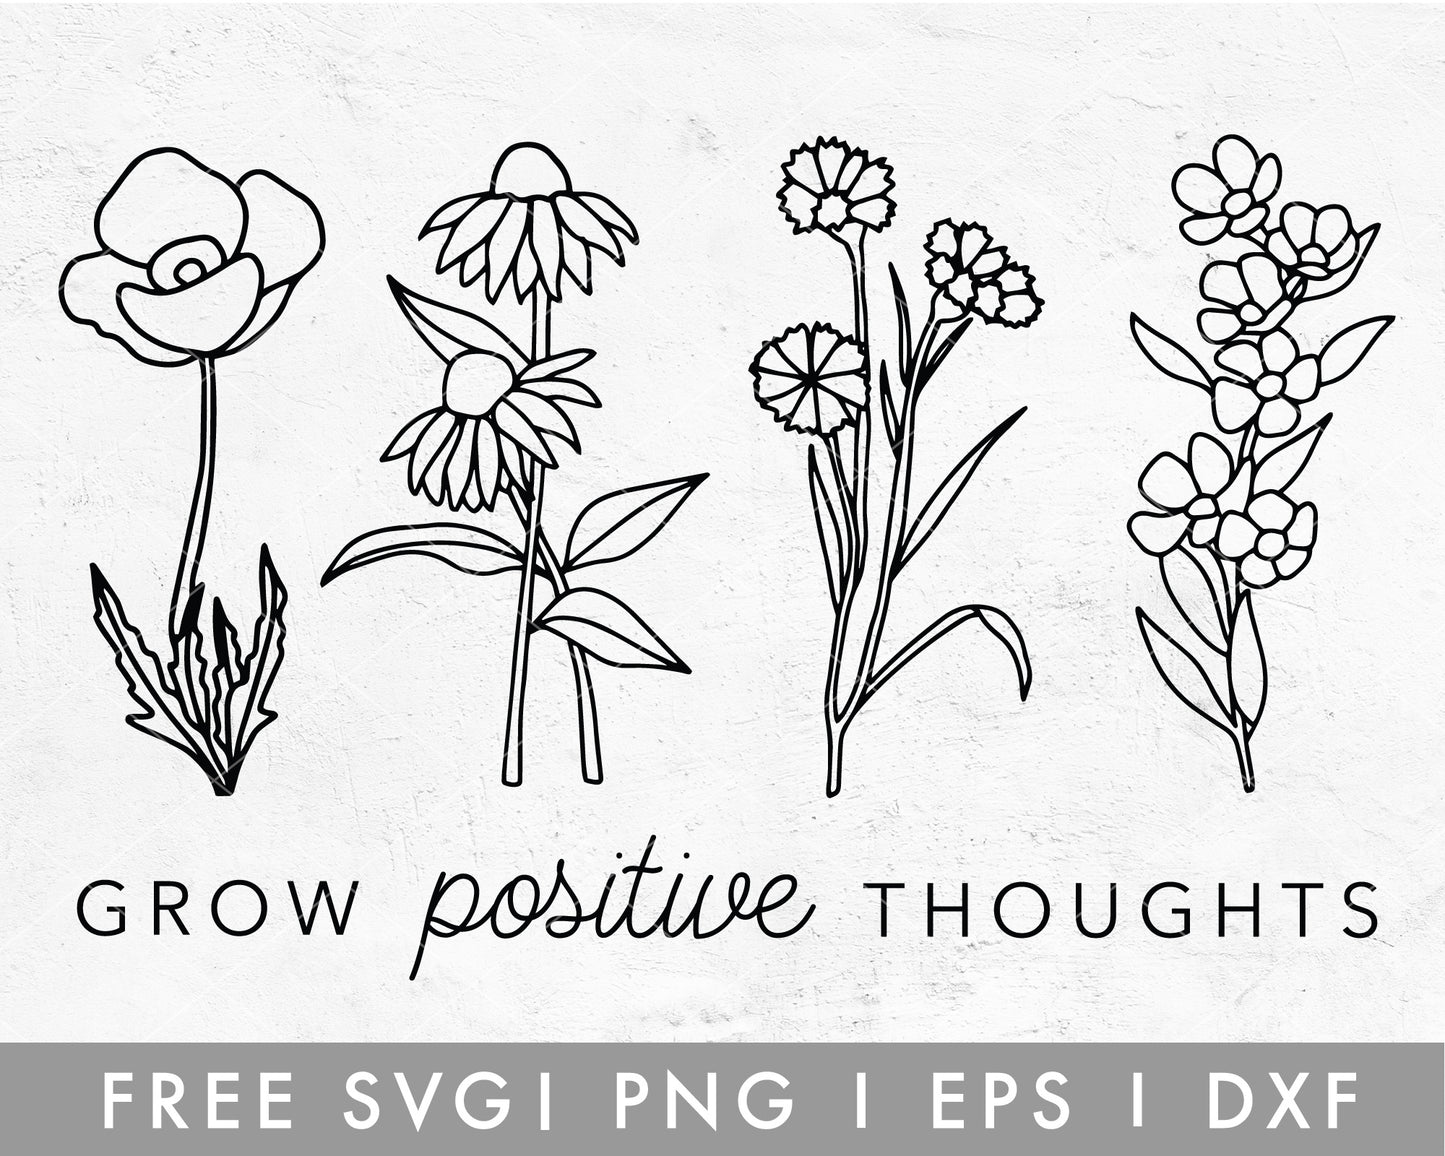 FREE Grow Positive Thoughts SVG